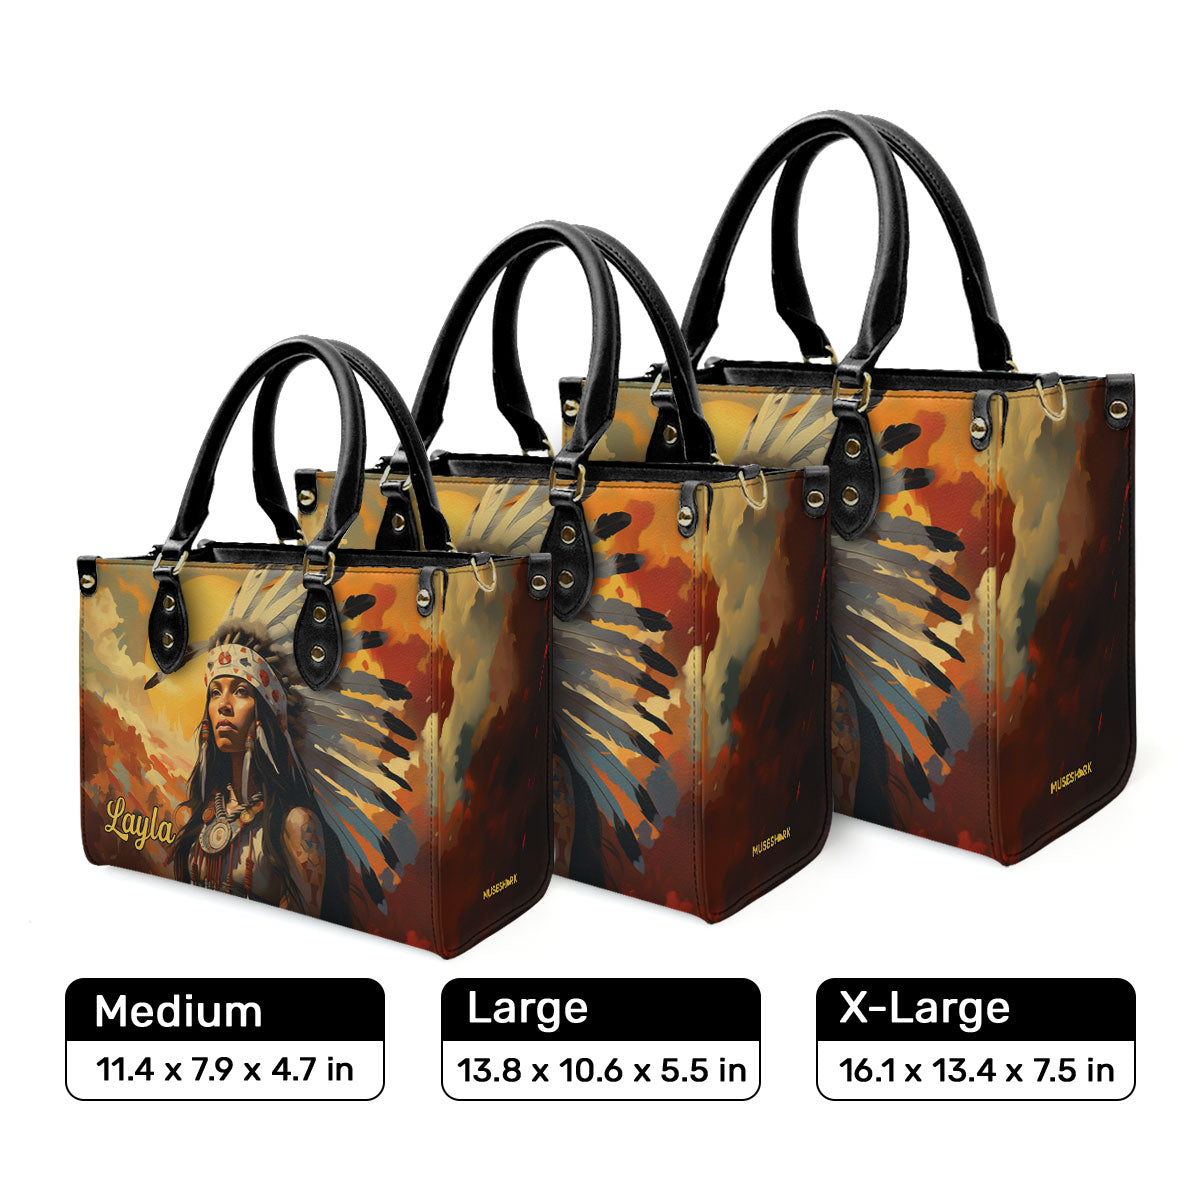 Native American Culture - Personalized Leather Handbag MS115